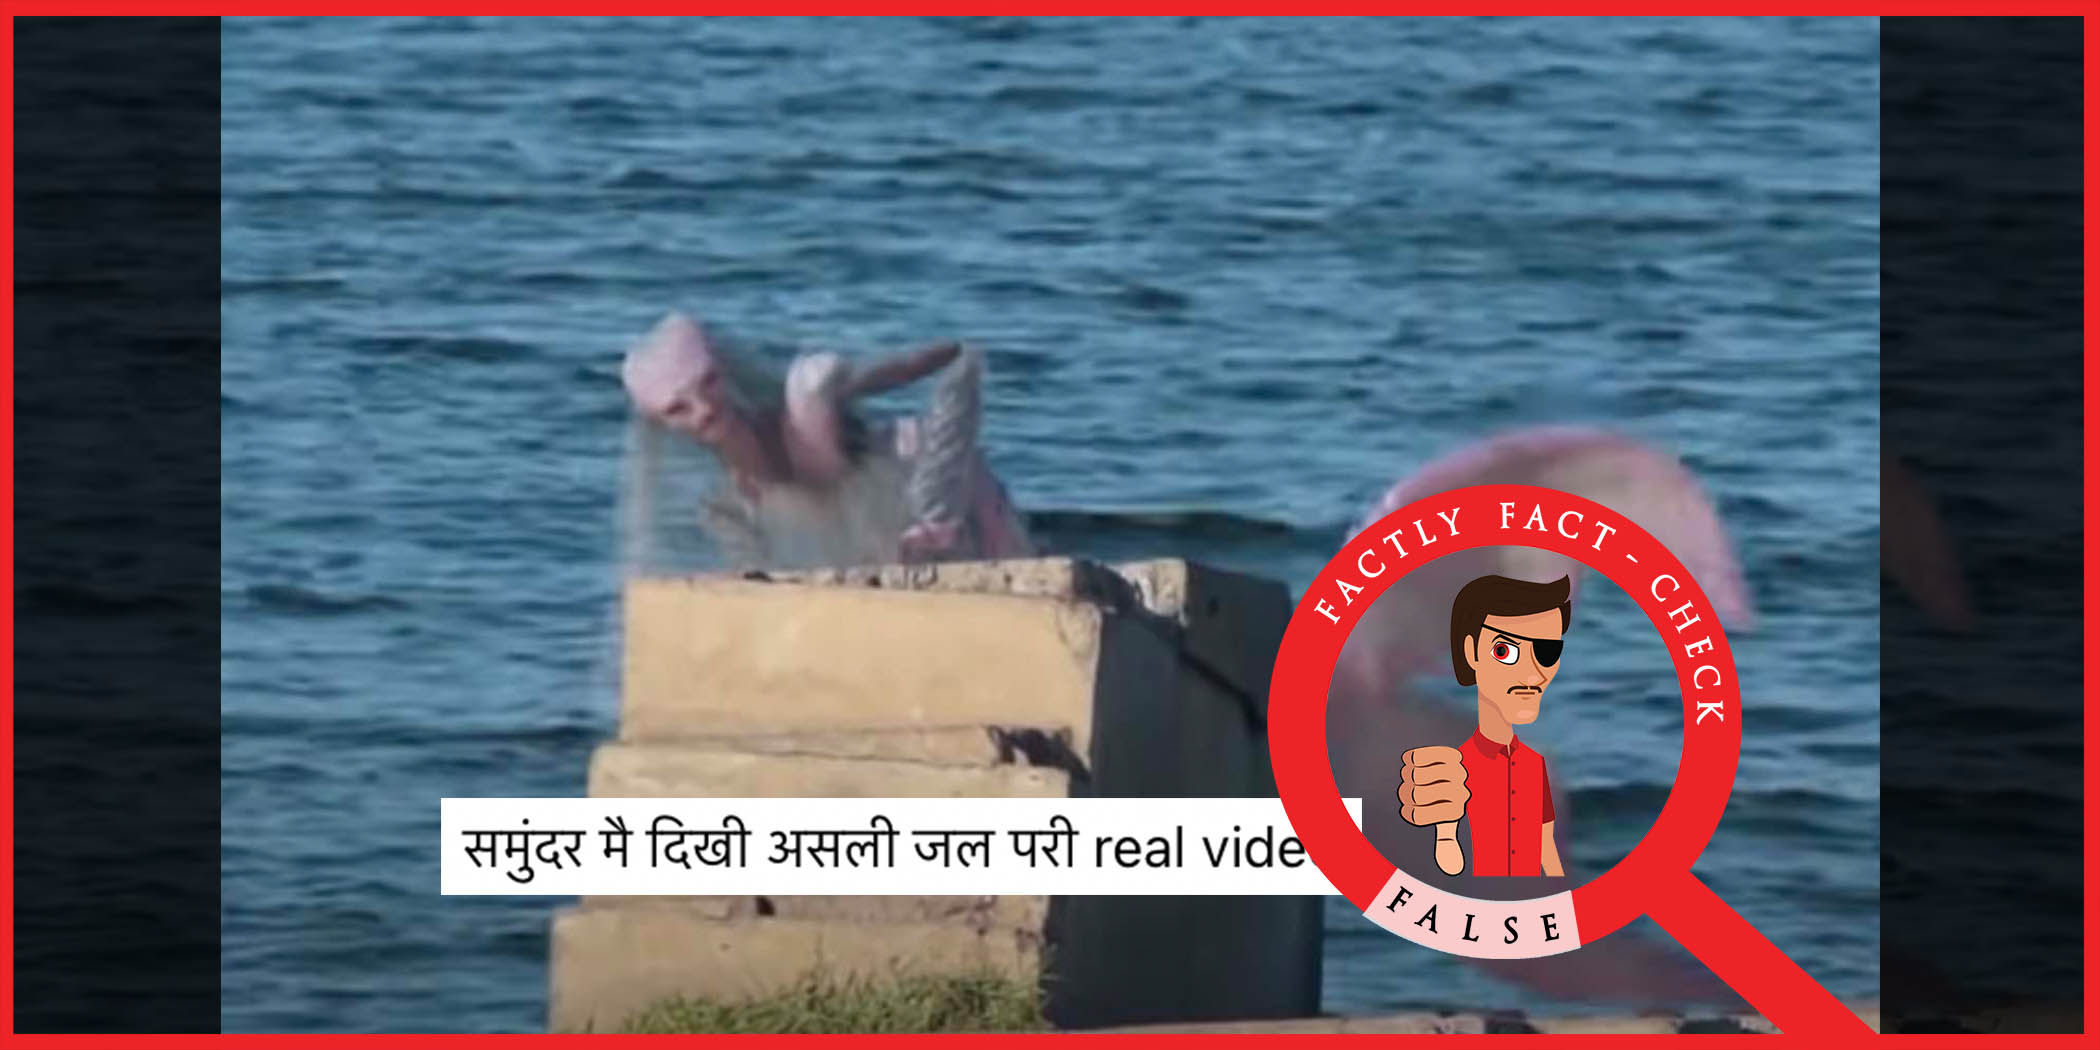 A CGI video is being falsely shared as visuals of a real mermaid spotted in  the ocean - FACTLY